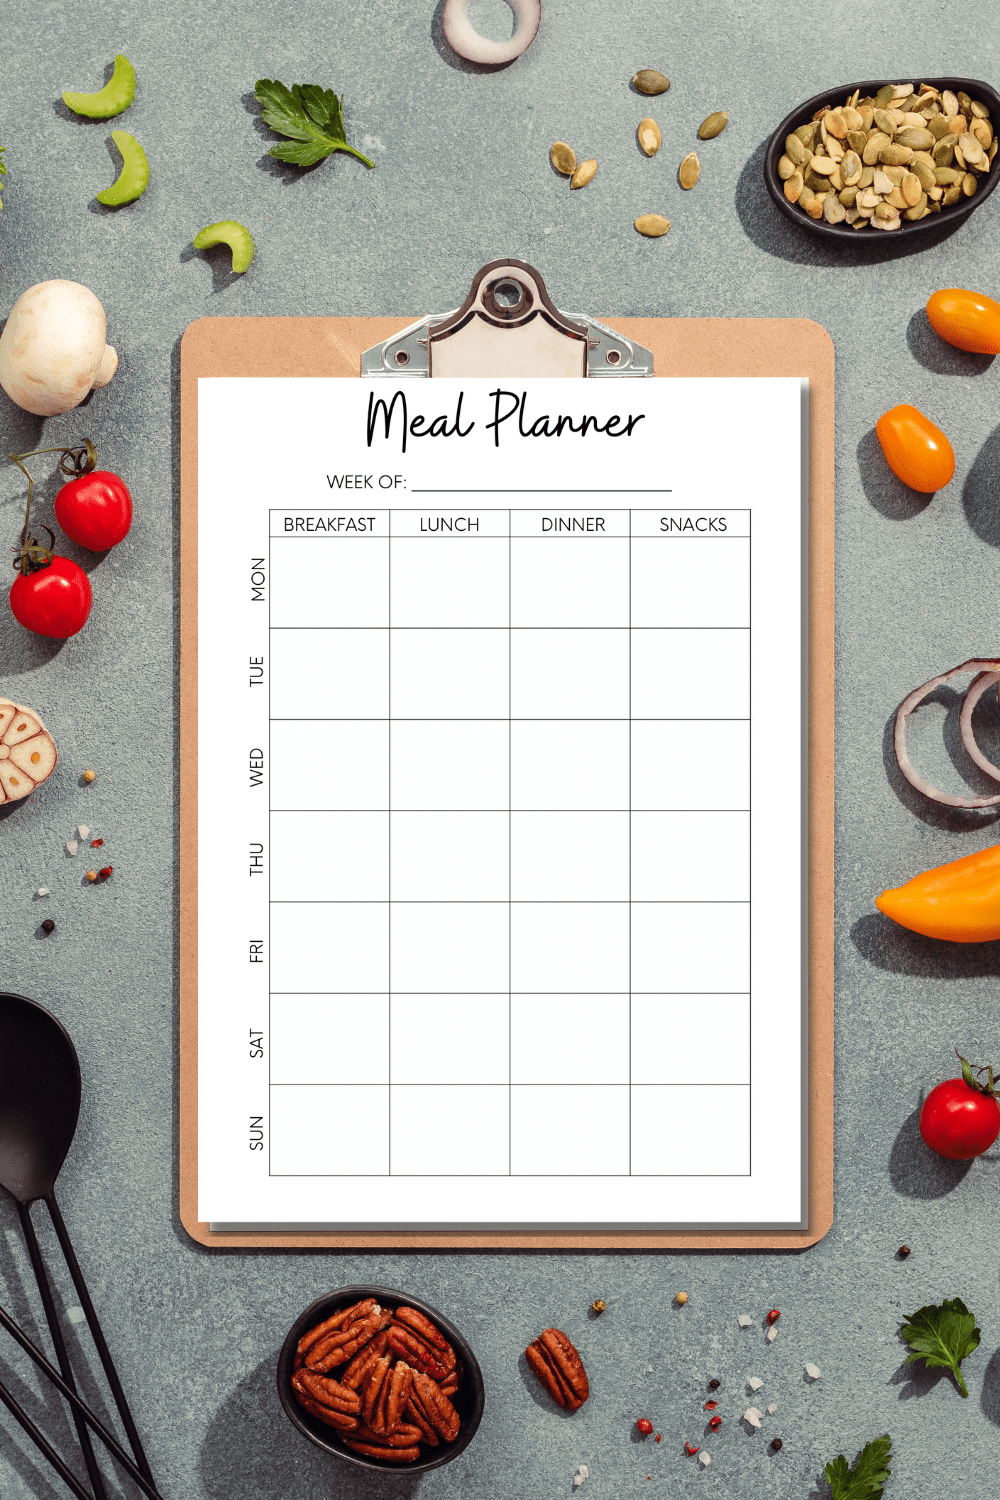 Free Meal Planner Printable That Will Make You Super Organized + How To Meal Plan!